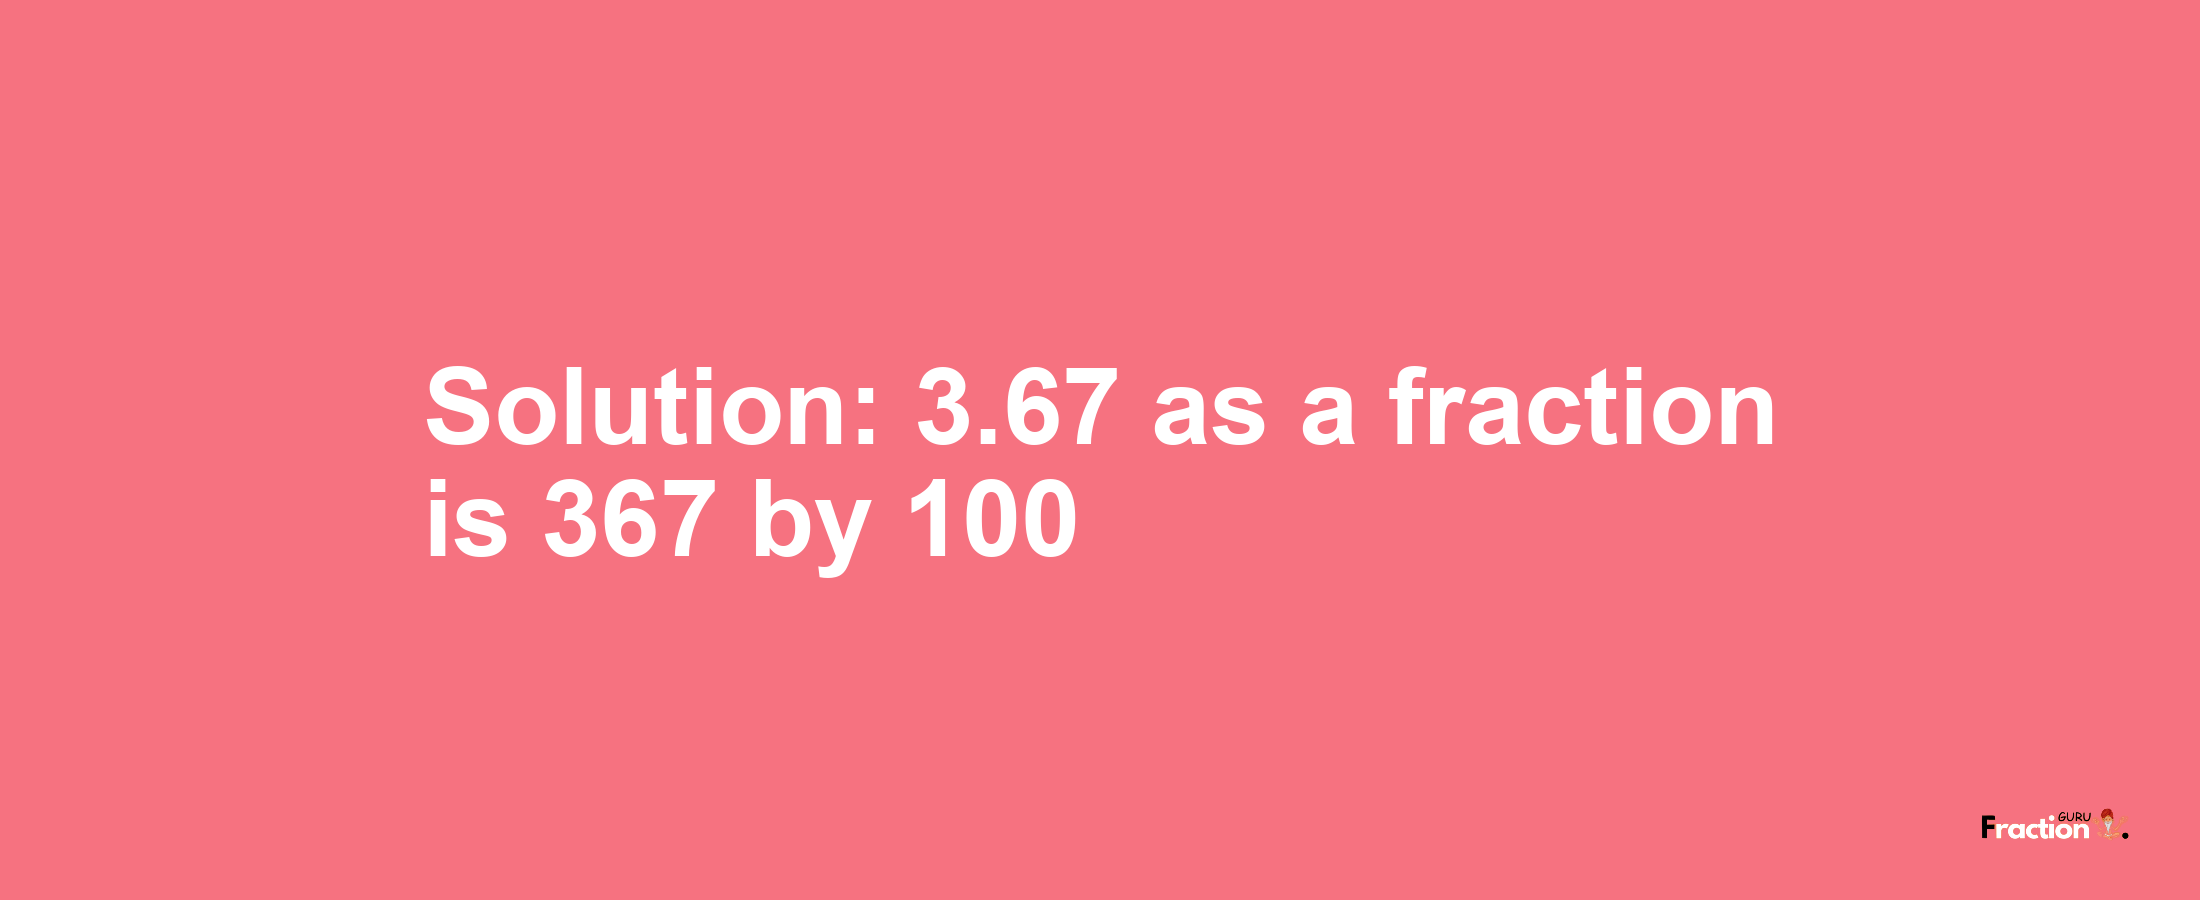 Solution:3.67 as a fraction is 367/100